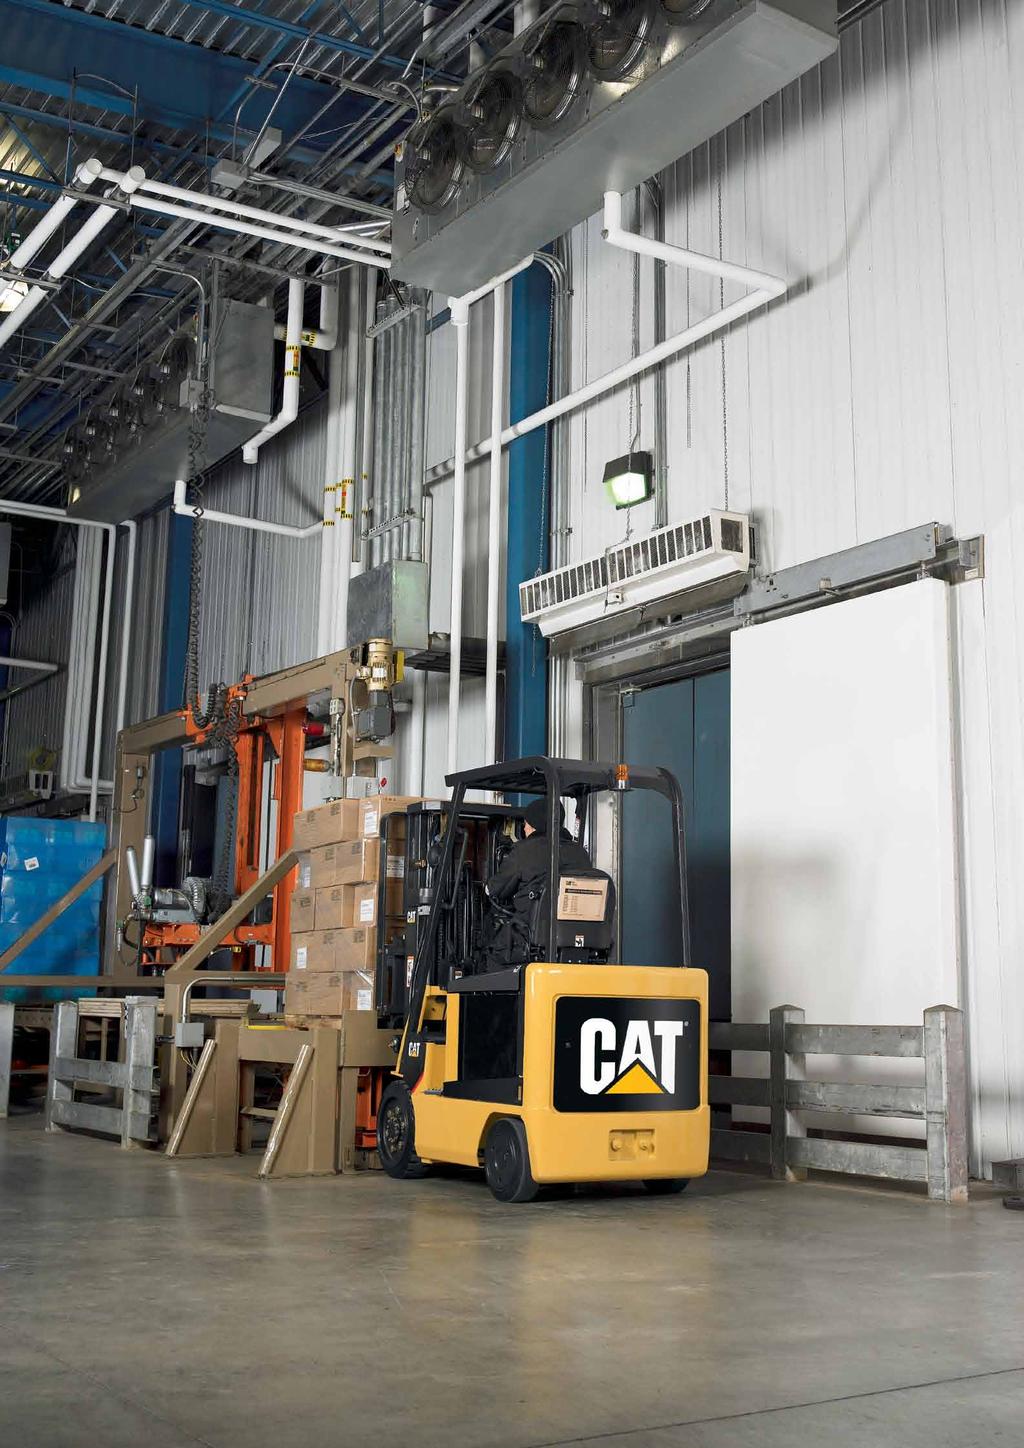 E3000-EC4000 Series Top Performance Demanding applications call for tough equipment. Cat lift trucks are built for diverse, rugged applications without sacrificing operator comfort and convenience.